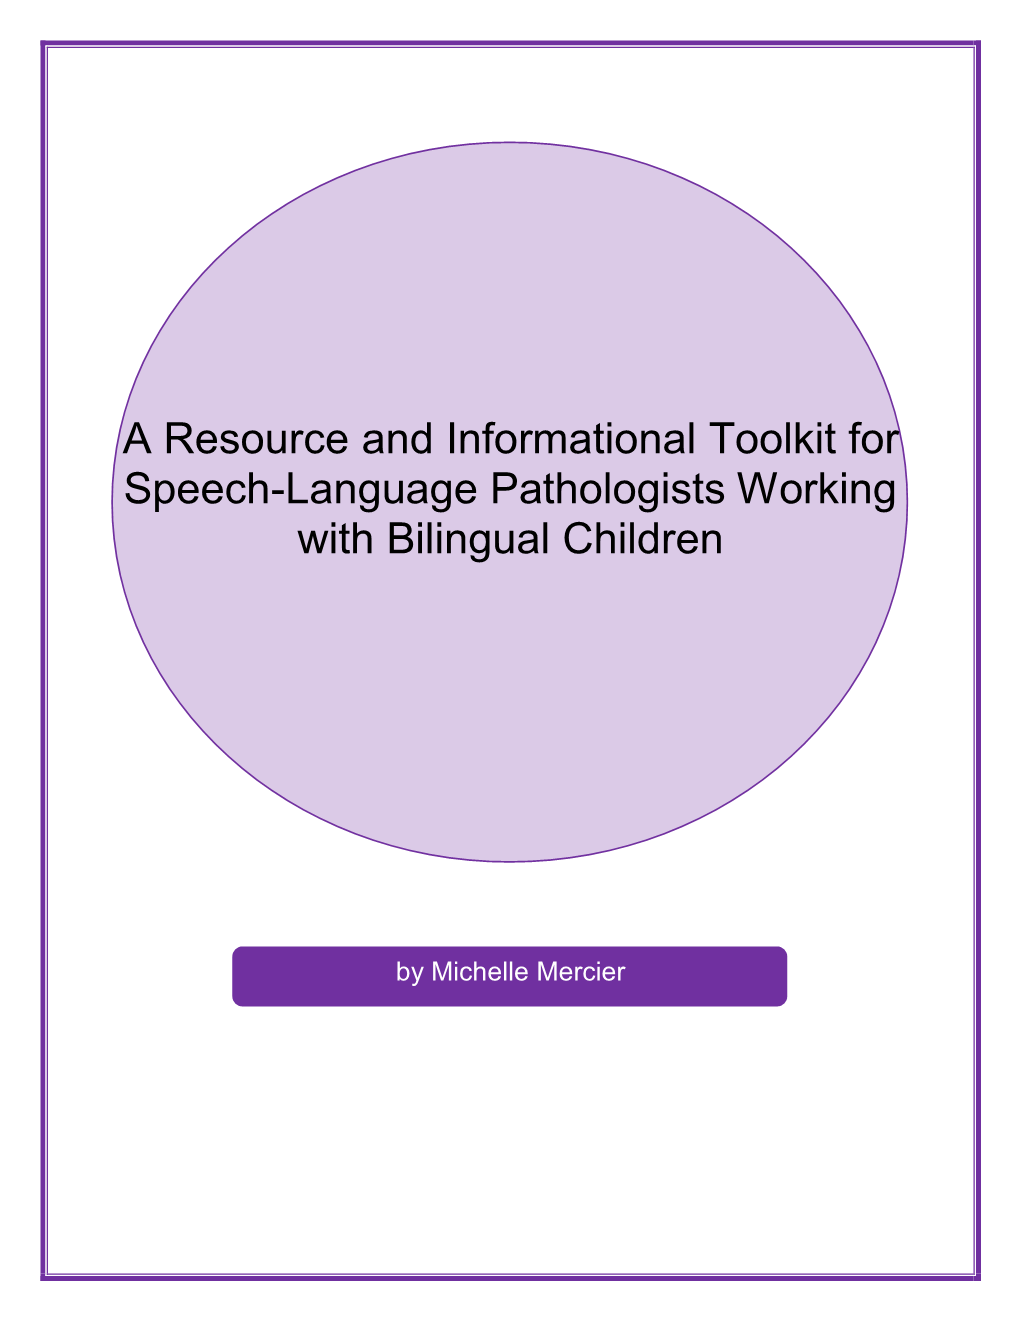 A Resource and Informational Toolkit for Speech-Language Pathologists Working with Bilingual Children